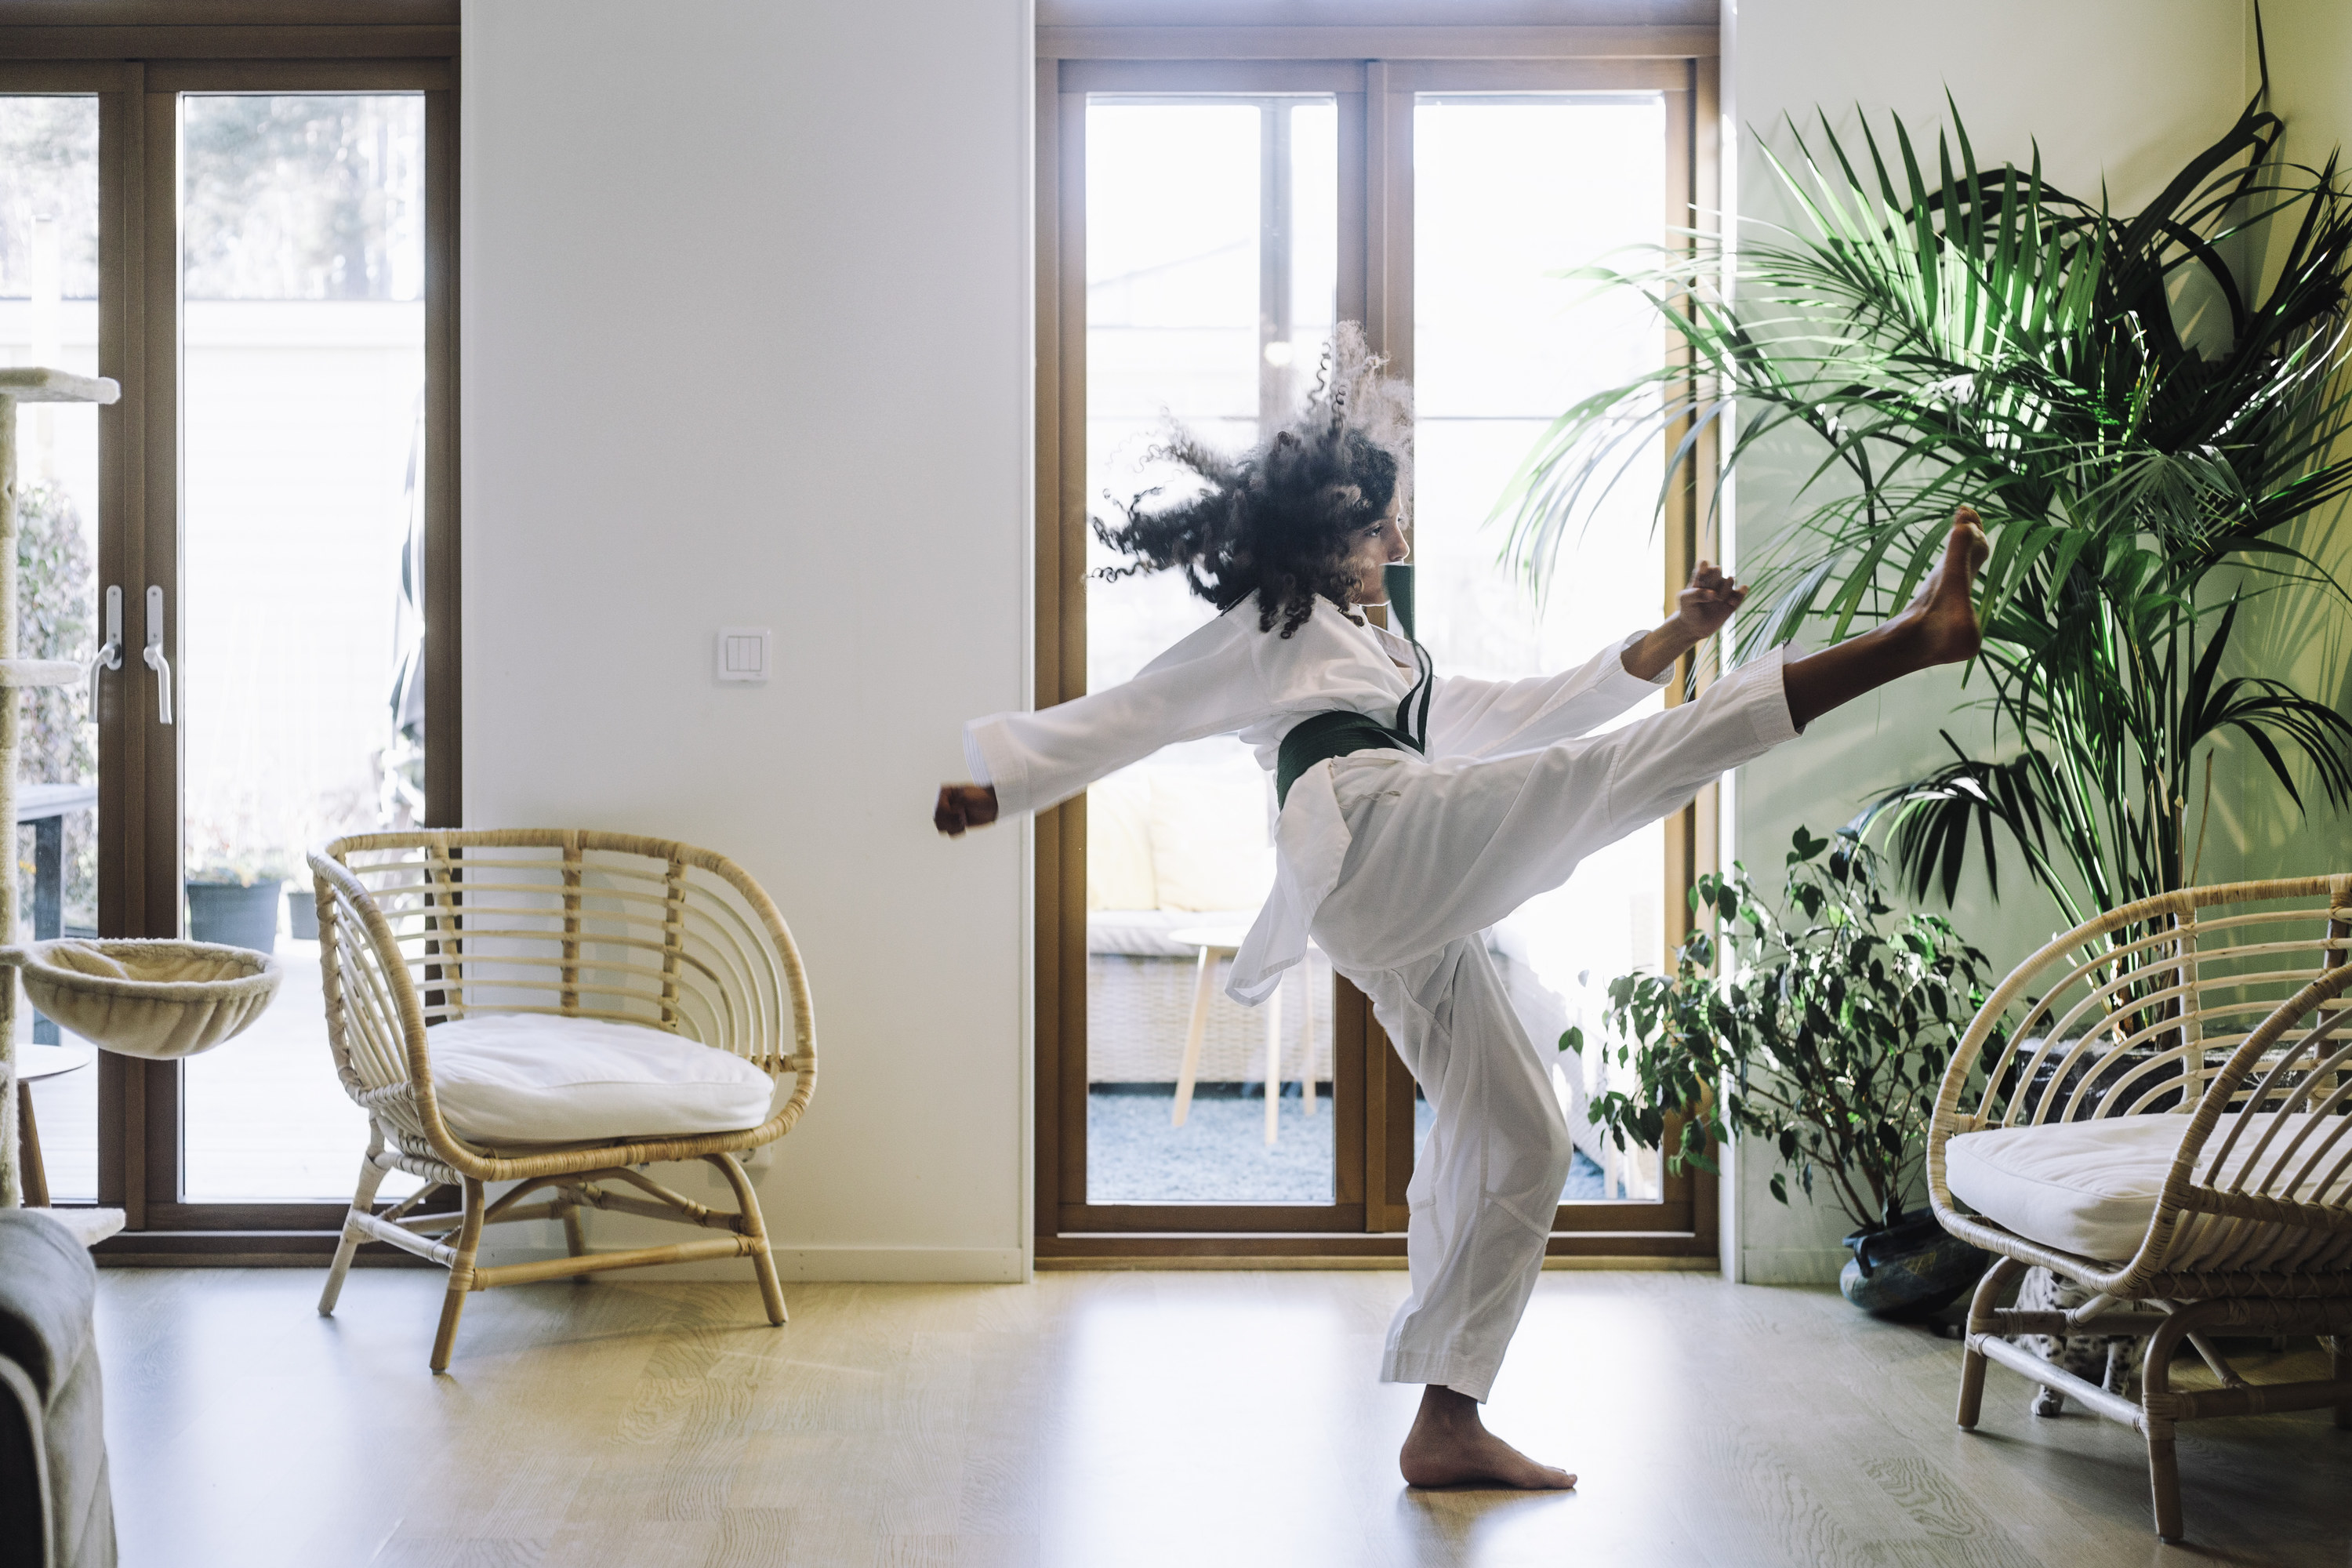 A woman practicing karate